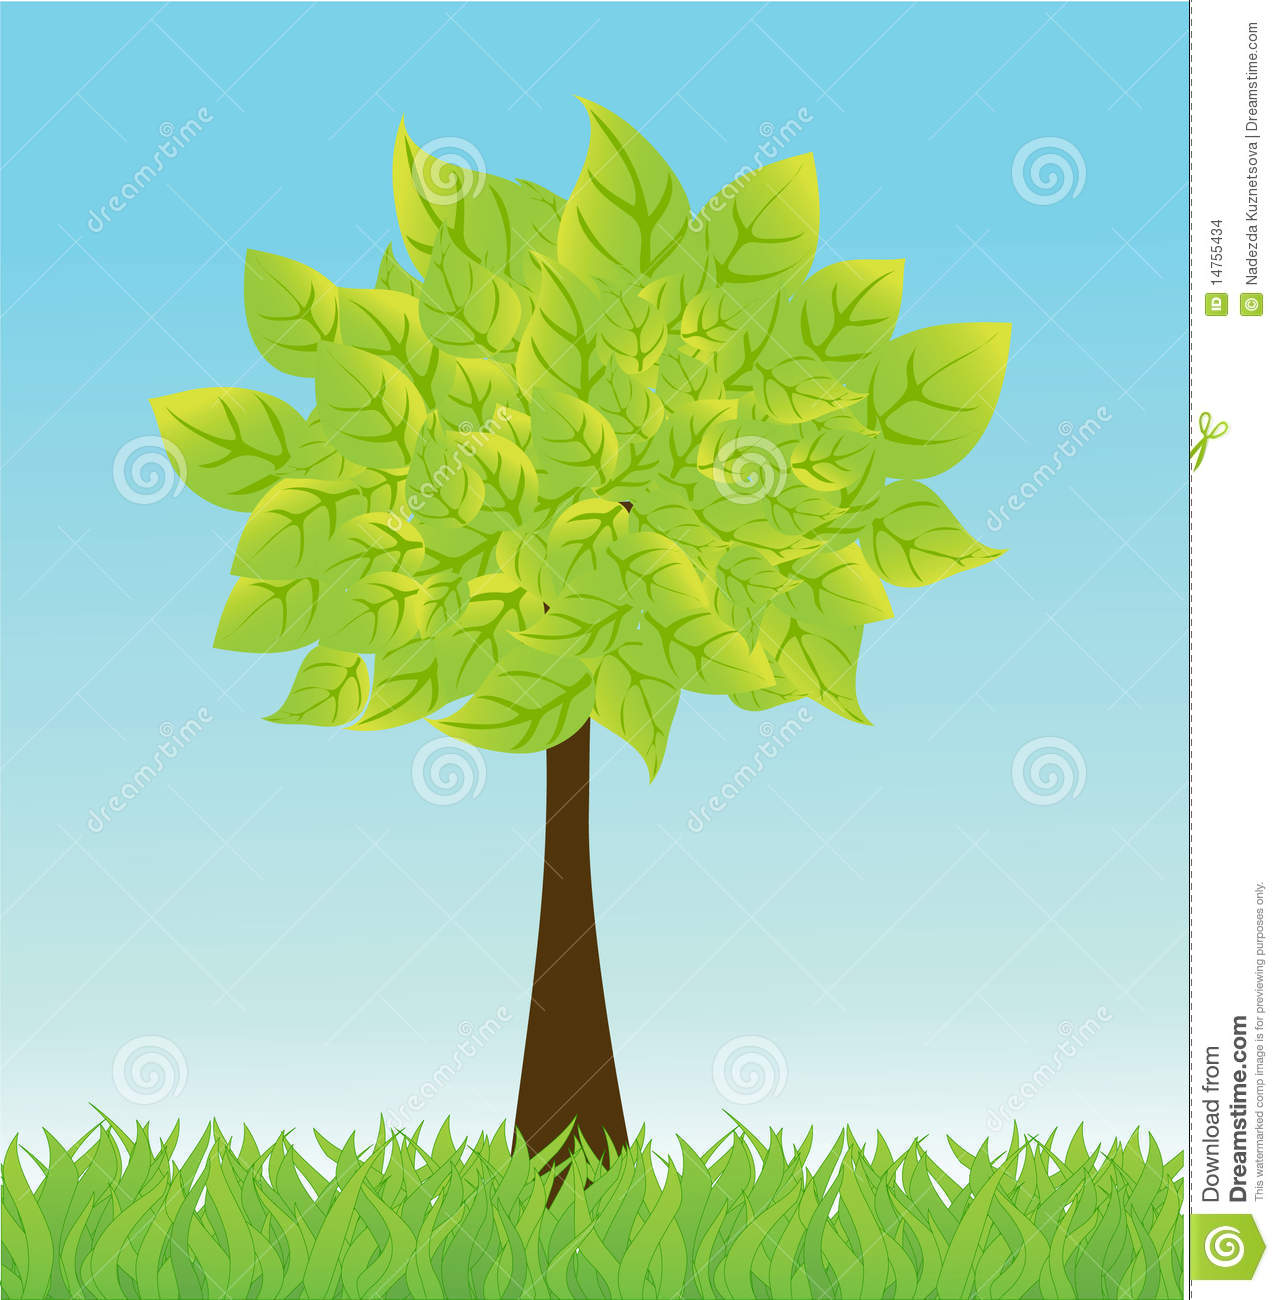 Background with Grass and Tree